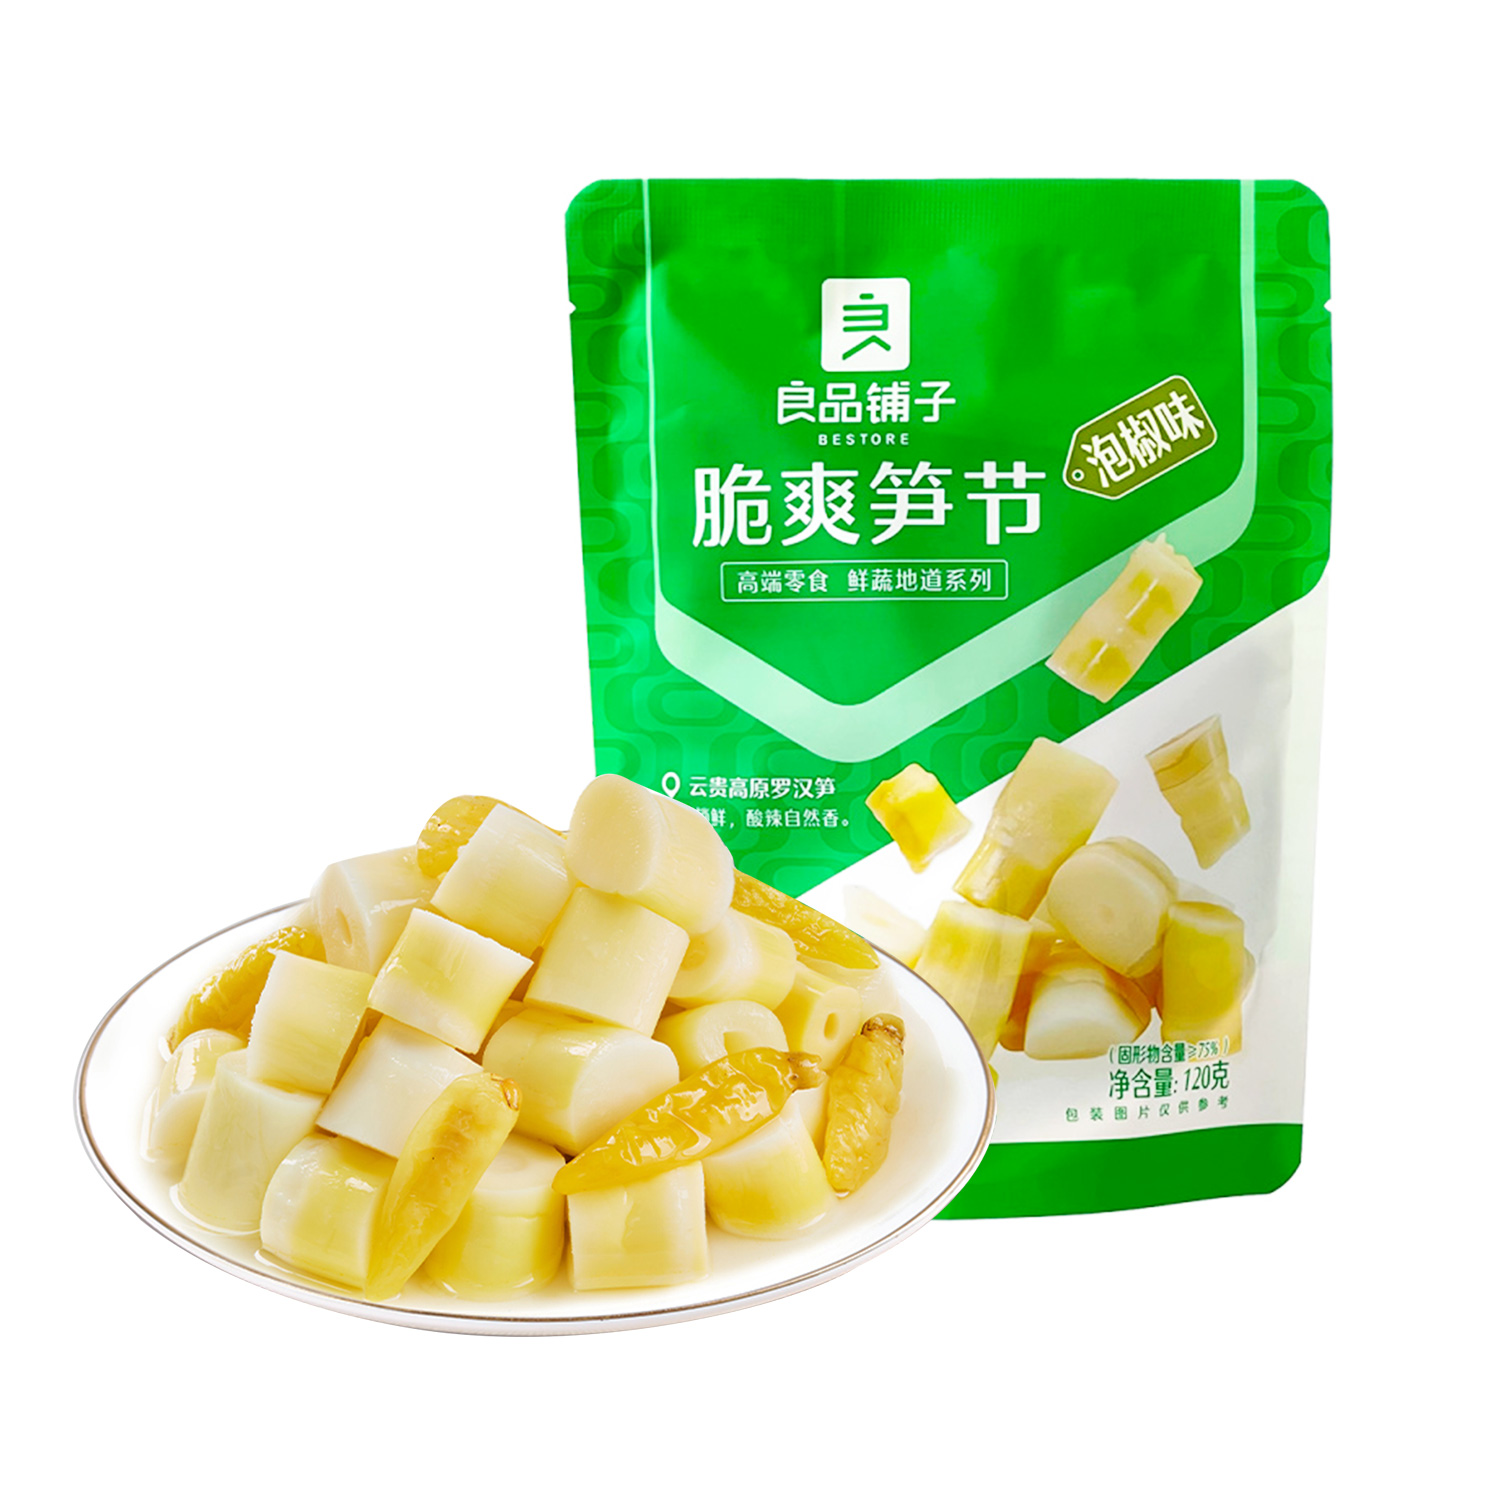 Bestore Crispy Bamboo Shoots Pickled Pepper Flavour 120g-eBest-Snacks,Snacks & Confectionery